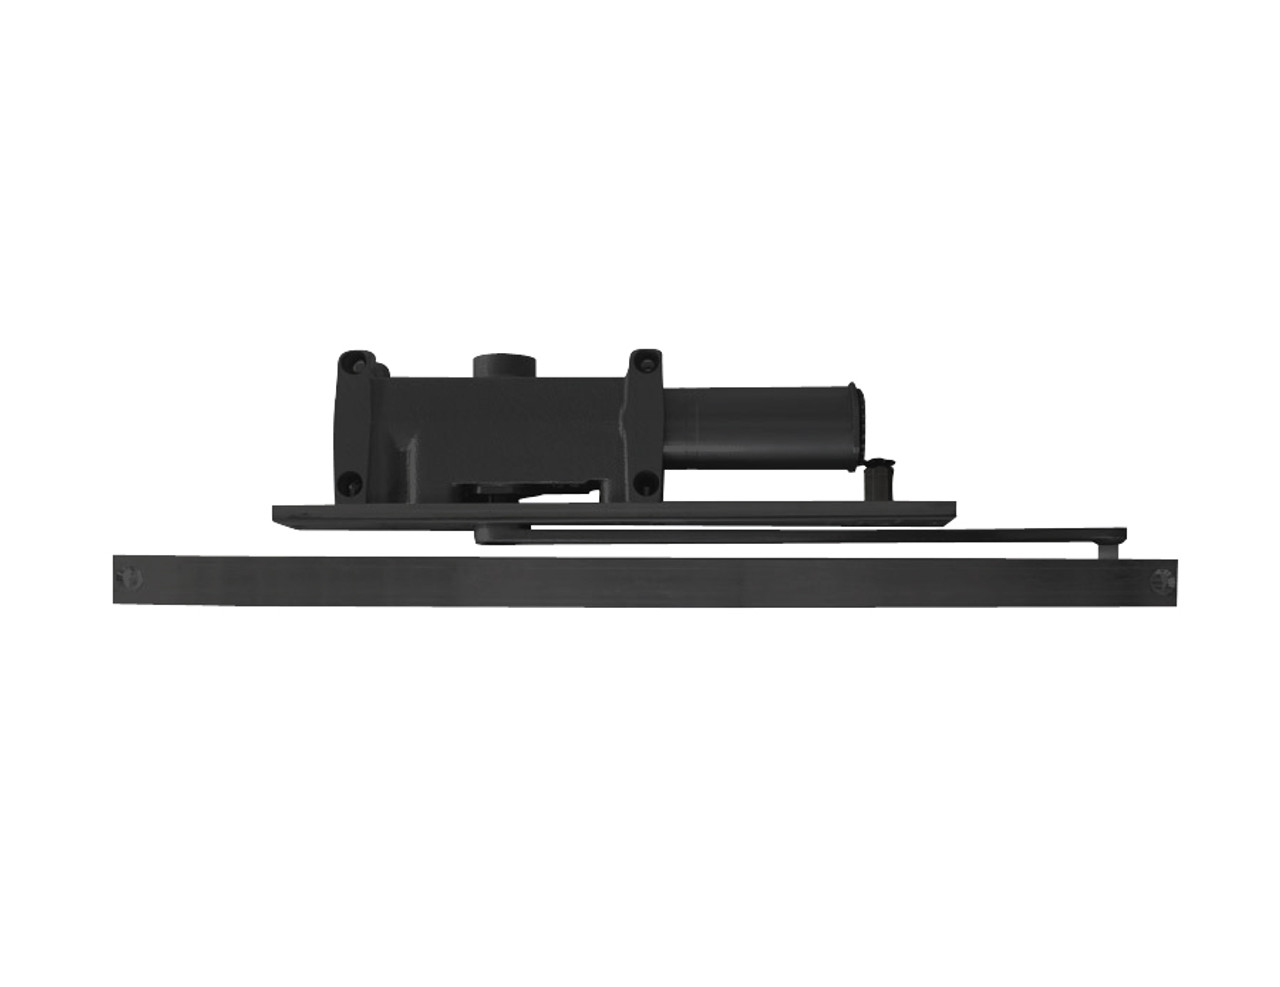 5014-H-RH-BLACK LCN Door Closer with Hold Open Arm in Black Finish